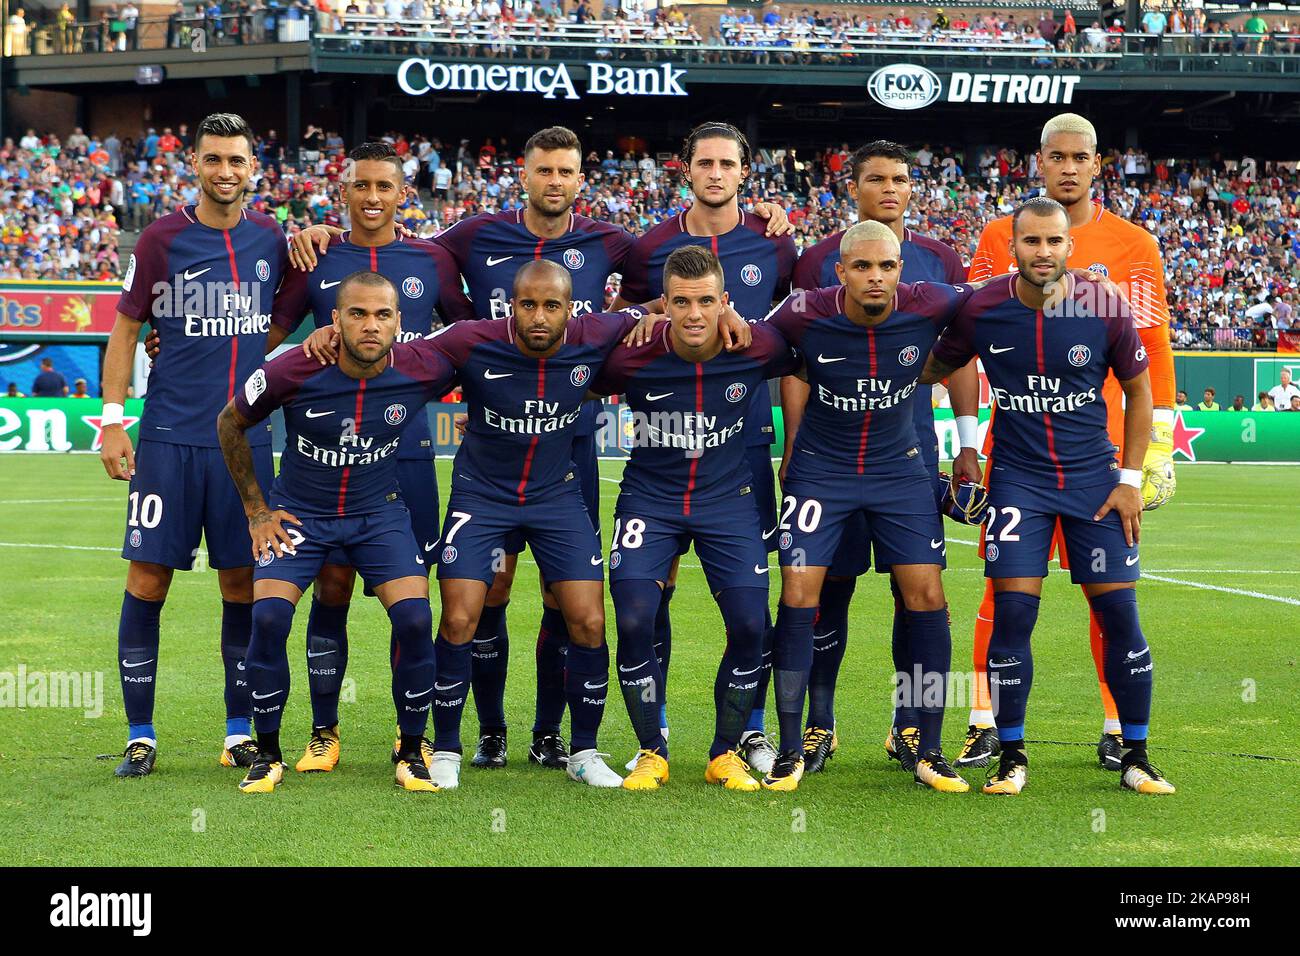 Paris Saint-Germain poses for a team photo prior to an International Champions Cup match between AS Roma and Paris Saint-Germain FC at Comerica Park in Detroit, Michigan on July 19, 2017. (Photo by Amy Lemus/NurPhoto) *** Please Use Credit from Credit Field *** Stock Photo